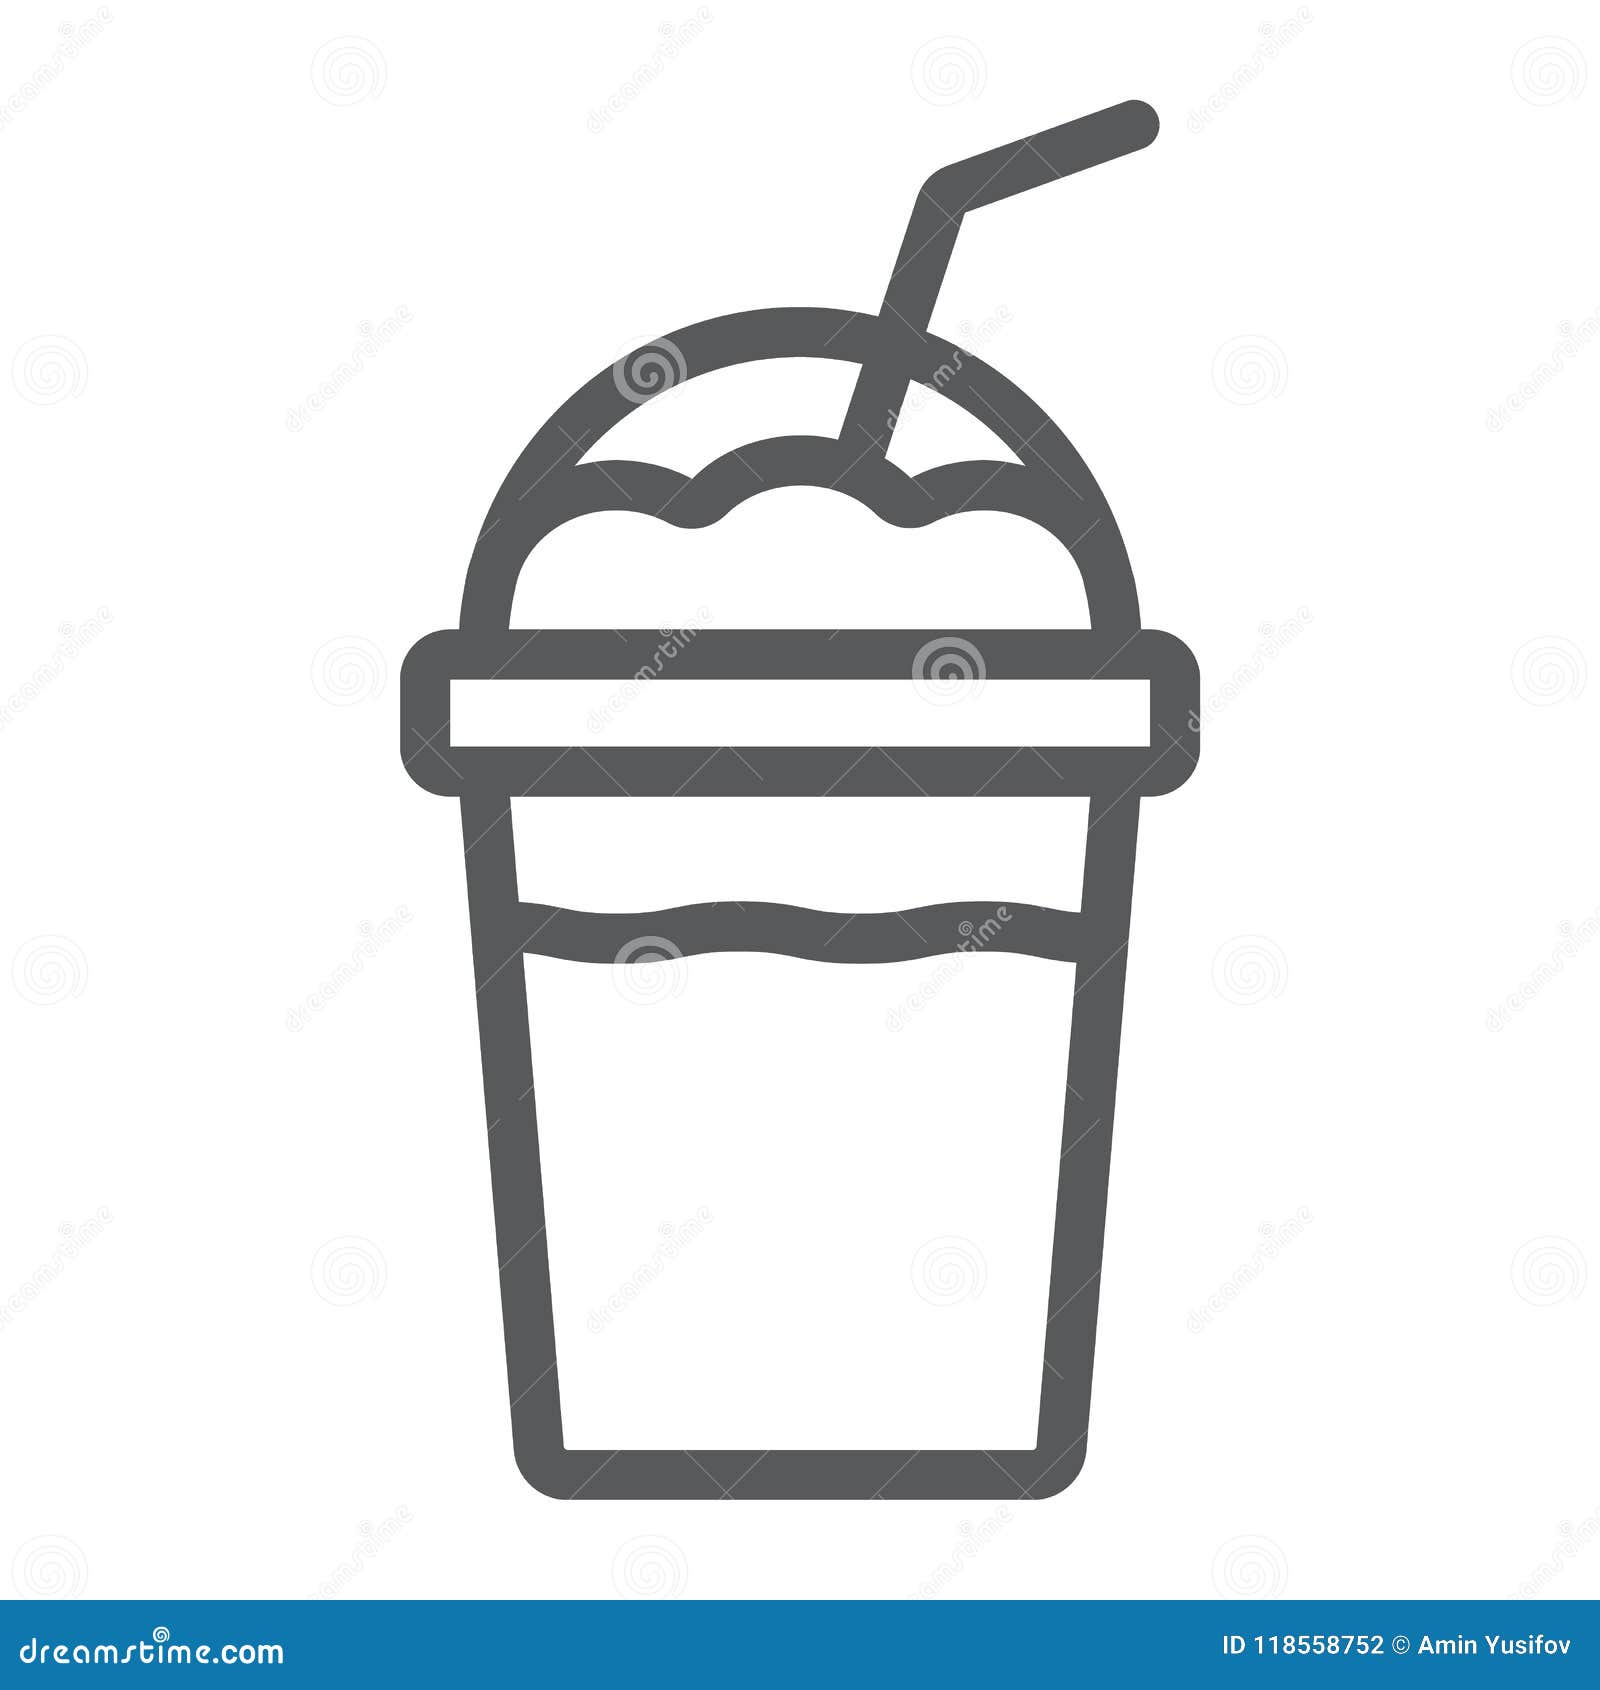 frappe line icon, coffee and cafe, cream coffee